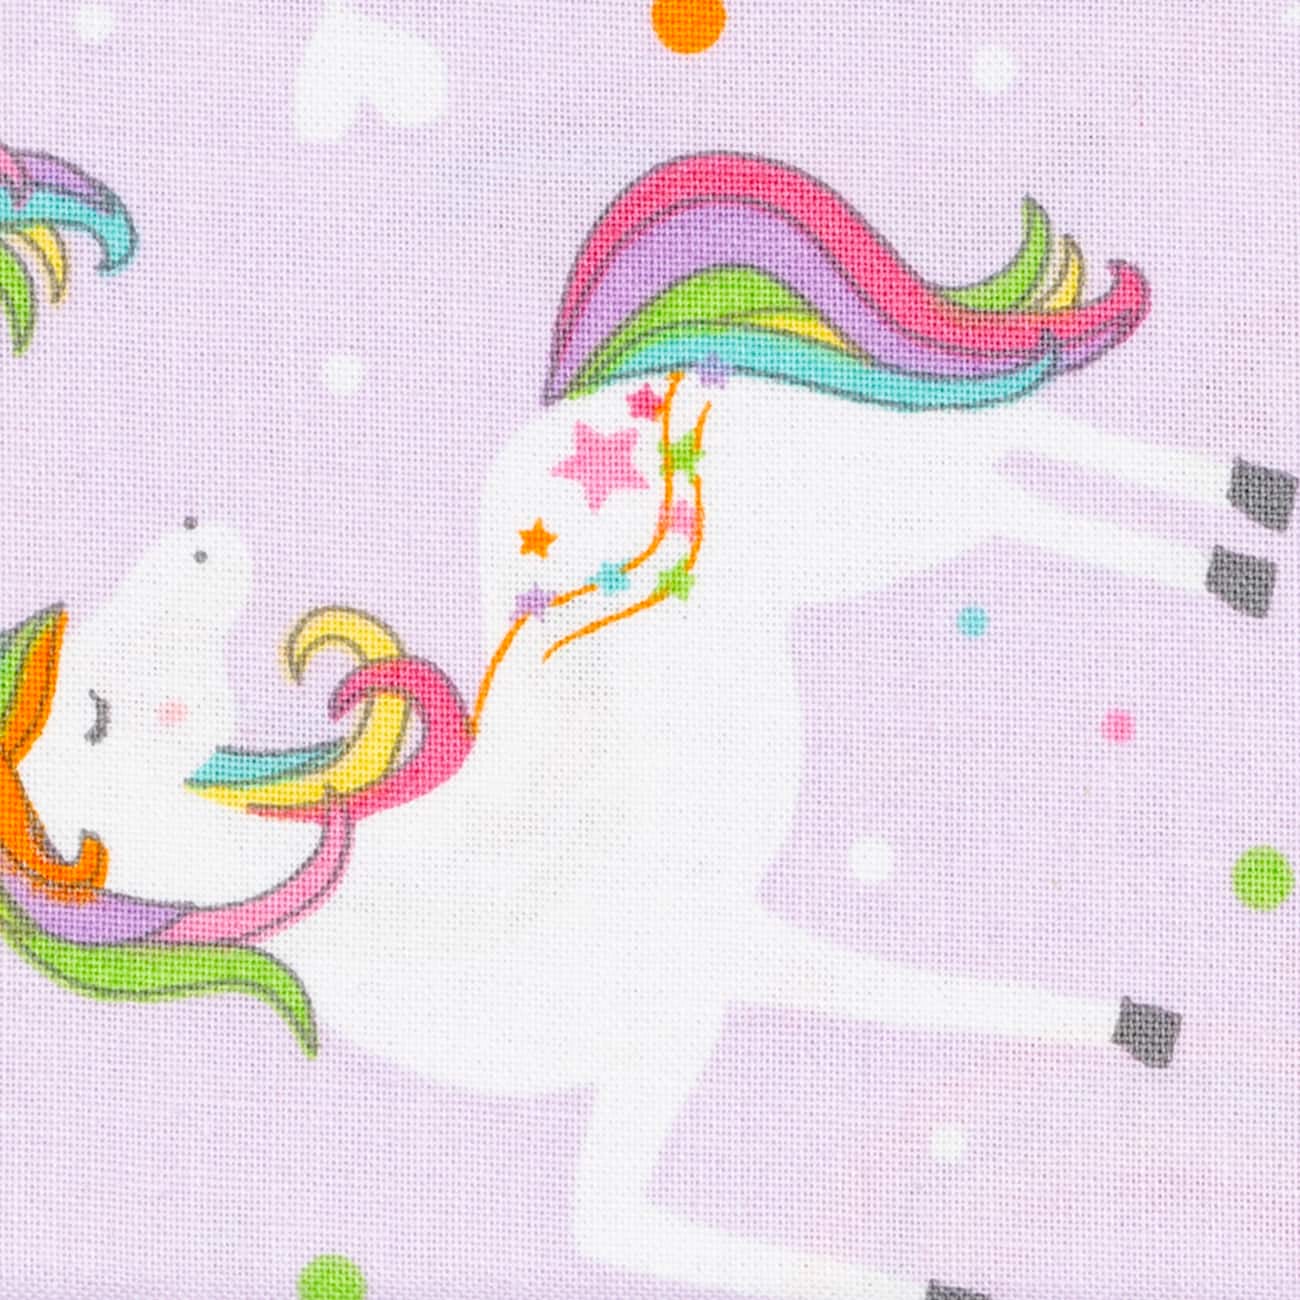 Unicorn Cotton Fabric Squares by Loops & Threads™, Michaels